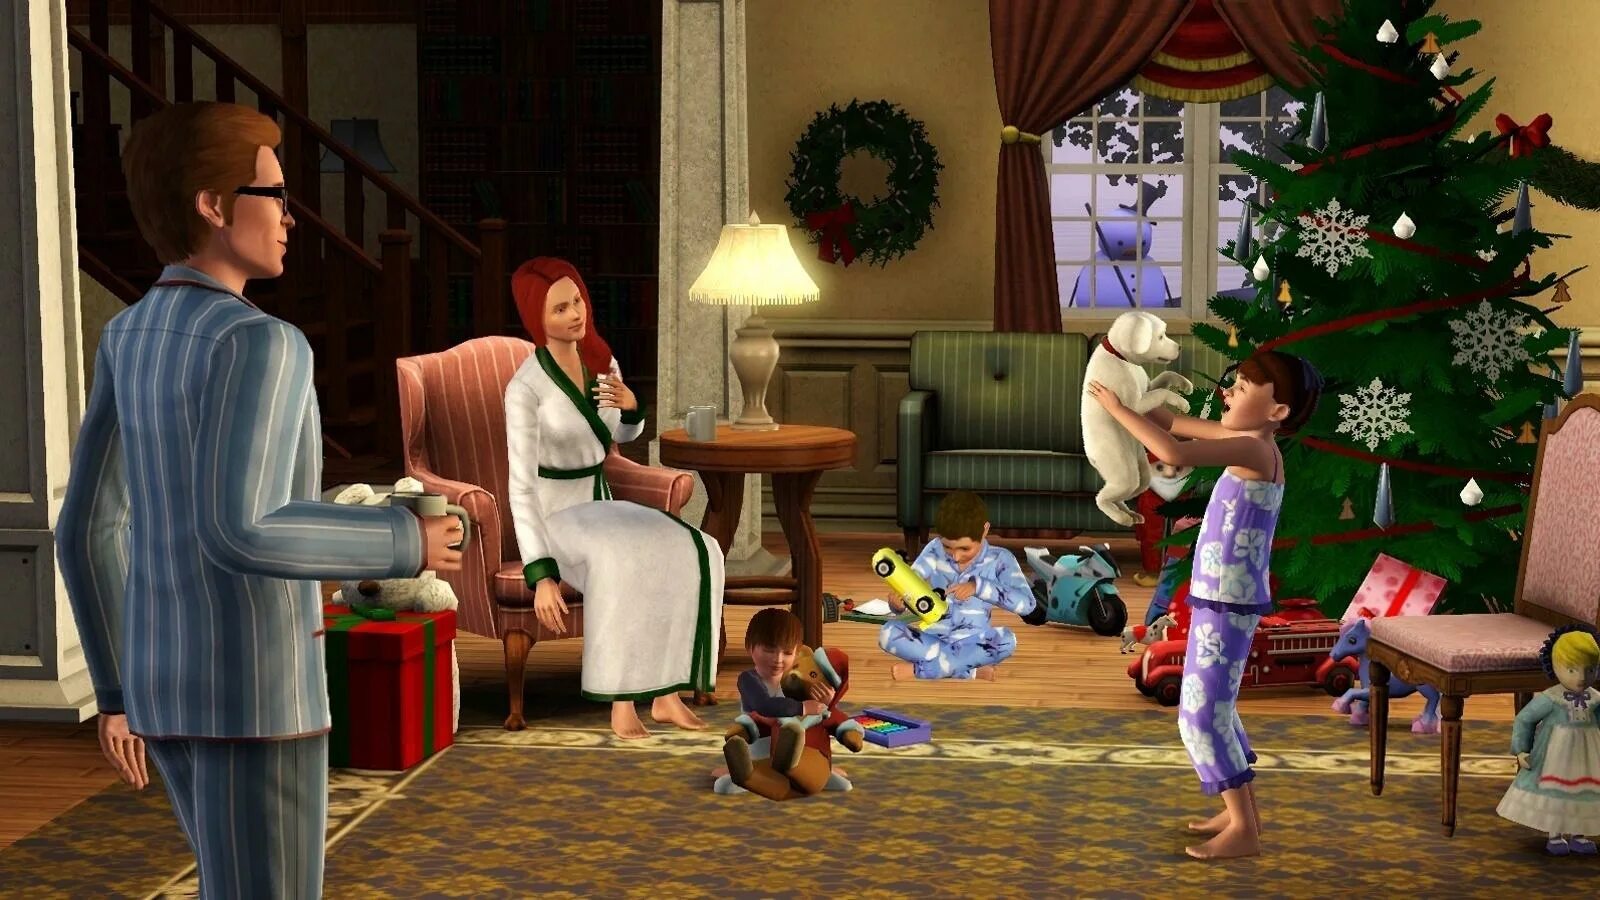 The SIMS 3. The SIMS 3 питомцы. SIMS 3 игра. Игра симс 3 питомцы. Игра новый год девочки